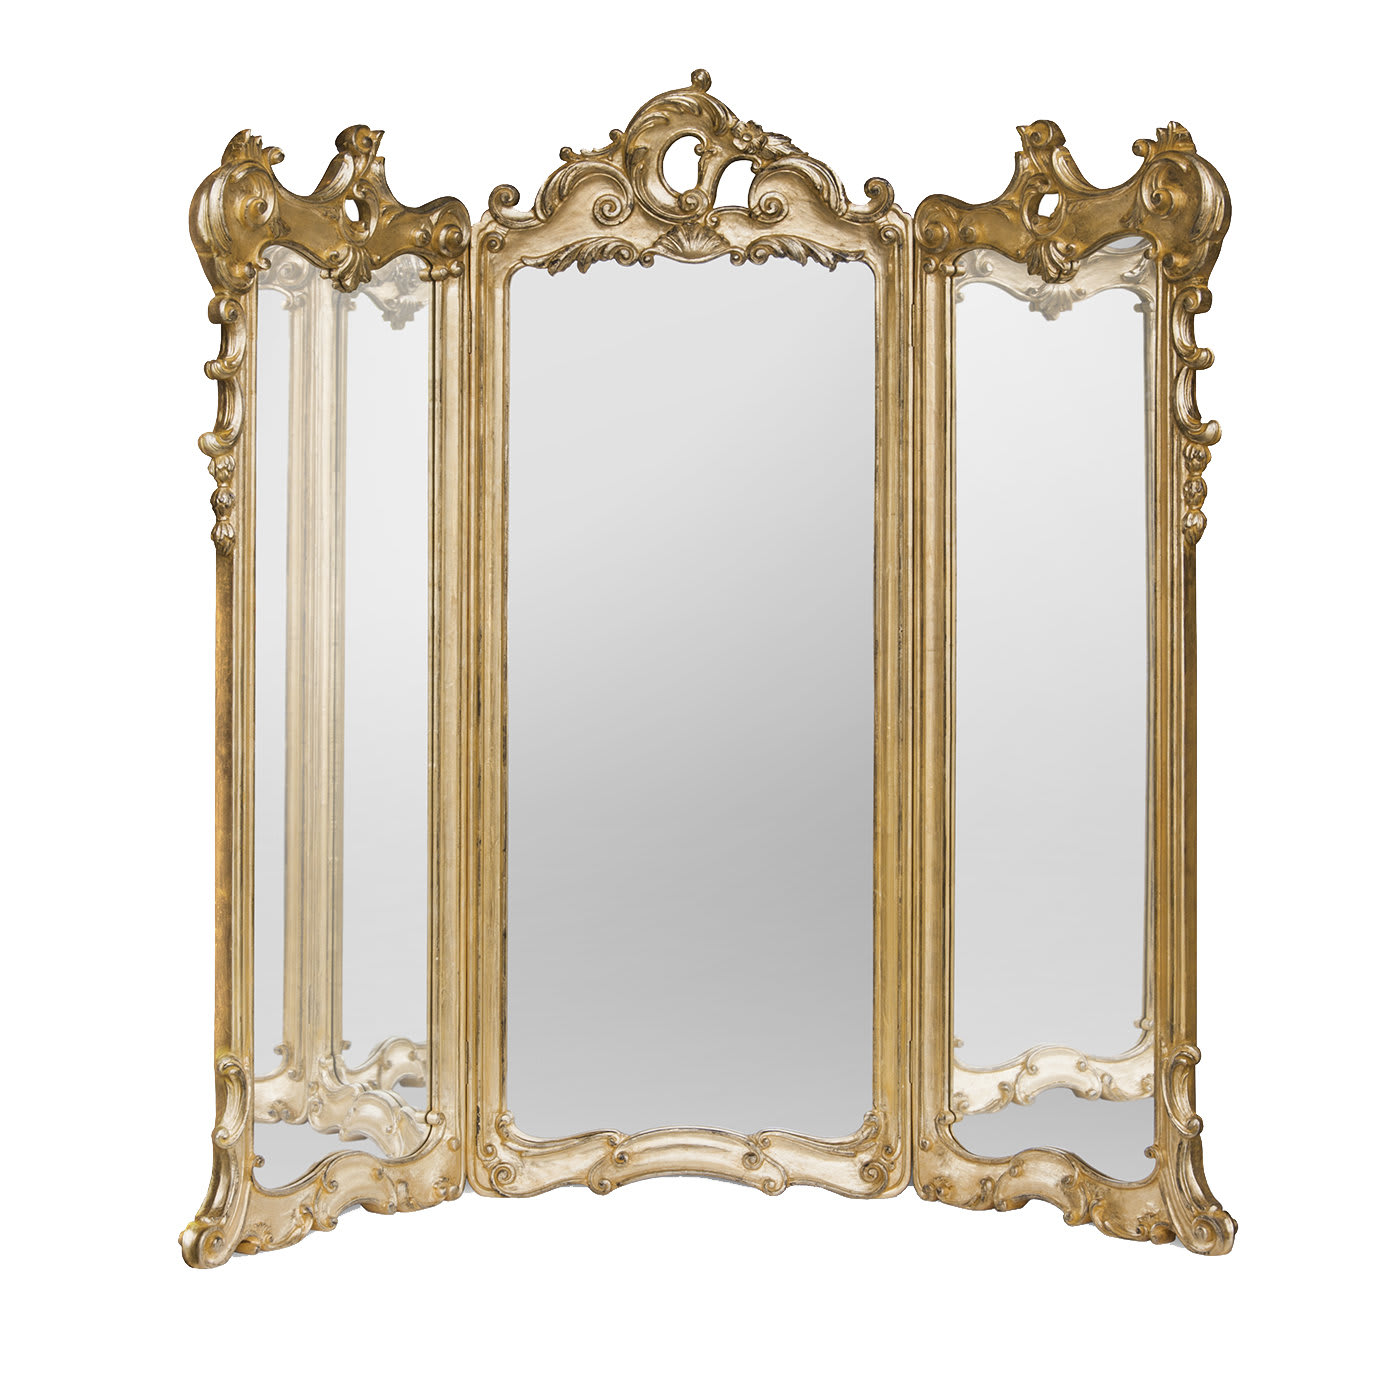 Three-Part Mirror with Gold Leaf - Bianchini & Capponi